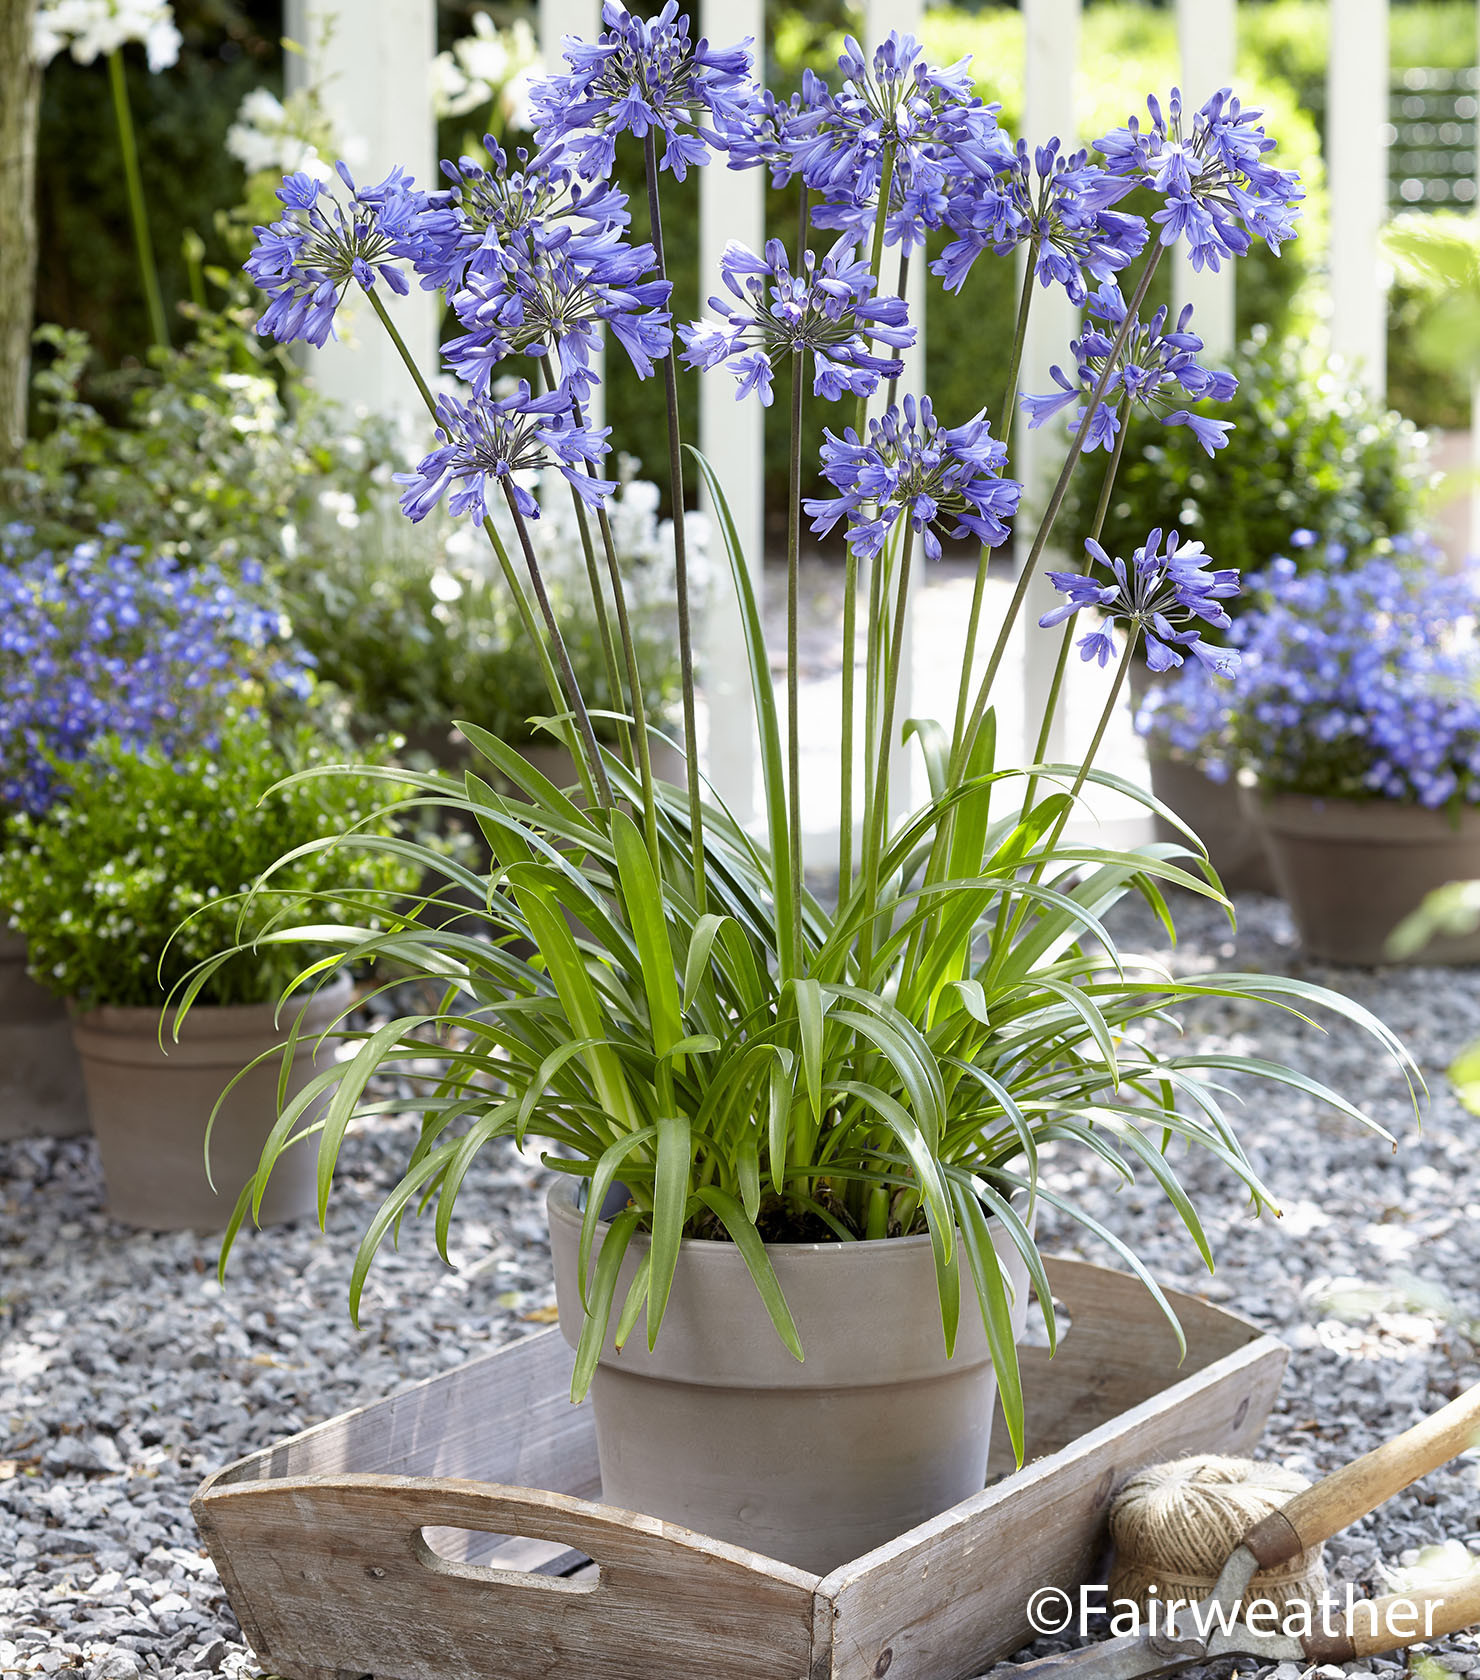 AGAPANTHUS  Ever sapphire